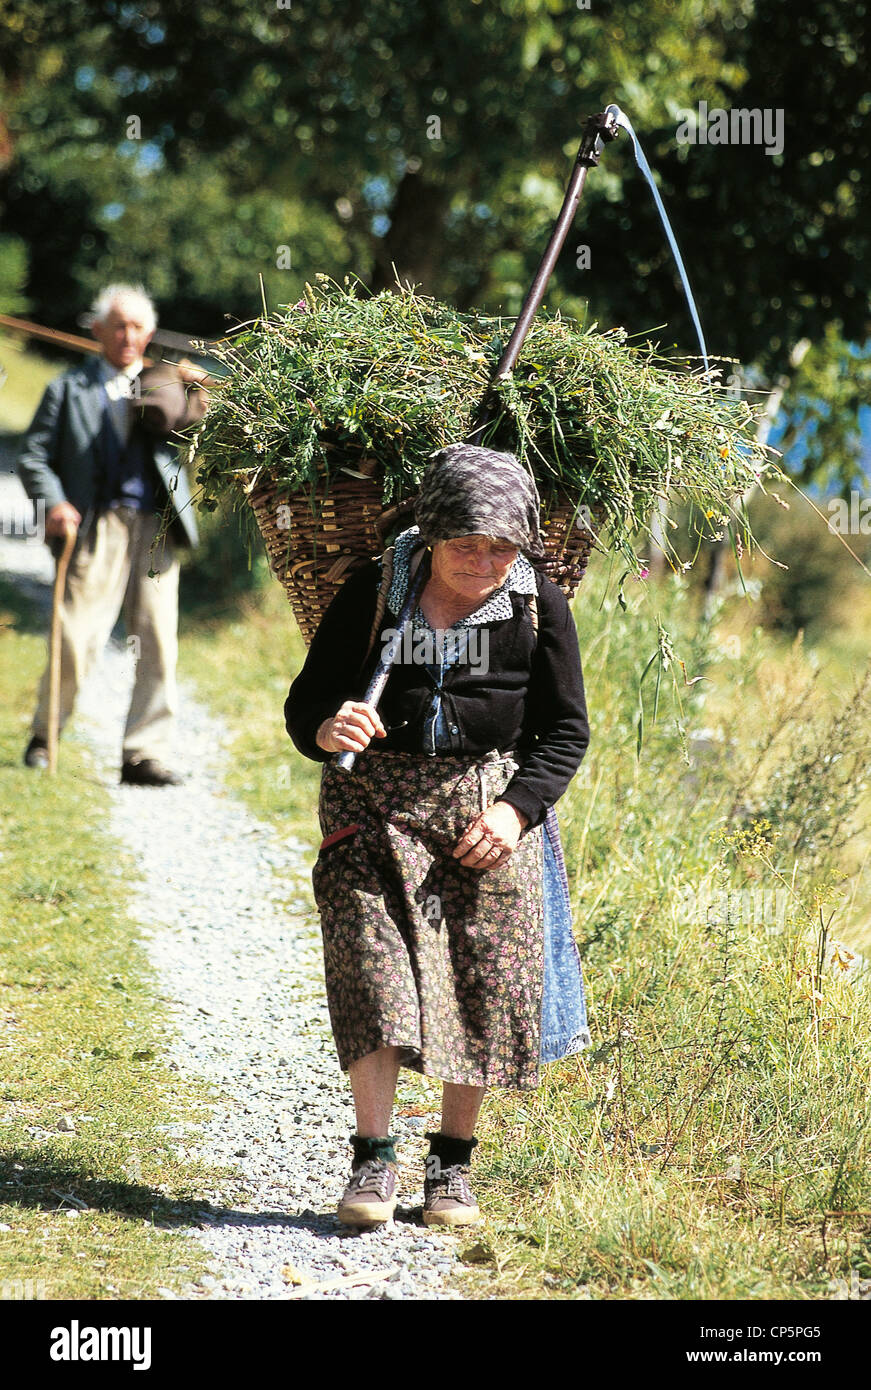 Trentino-Alto Adige - Val Fundres (Bz). Peasant carrying grass into a basket. Stock Photo